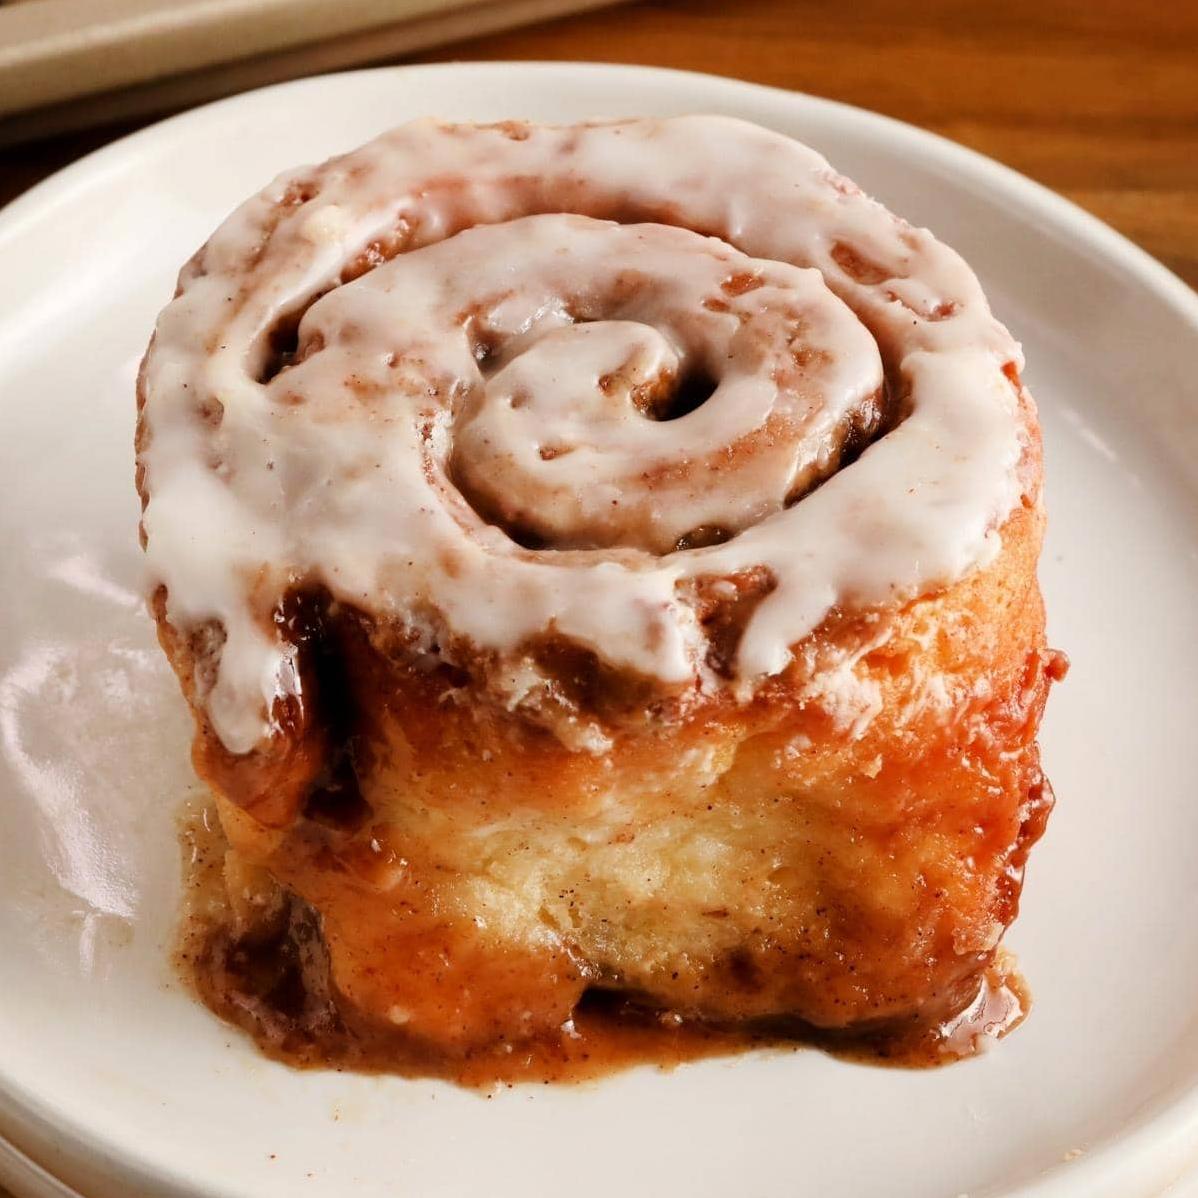  These cinnamon rolls are the perfect way to start your morning – gluten-free and delicious.